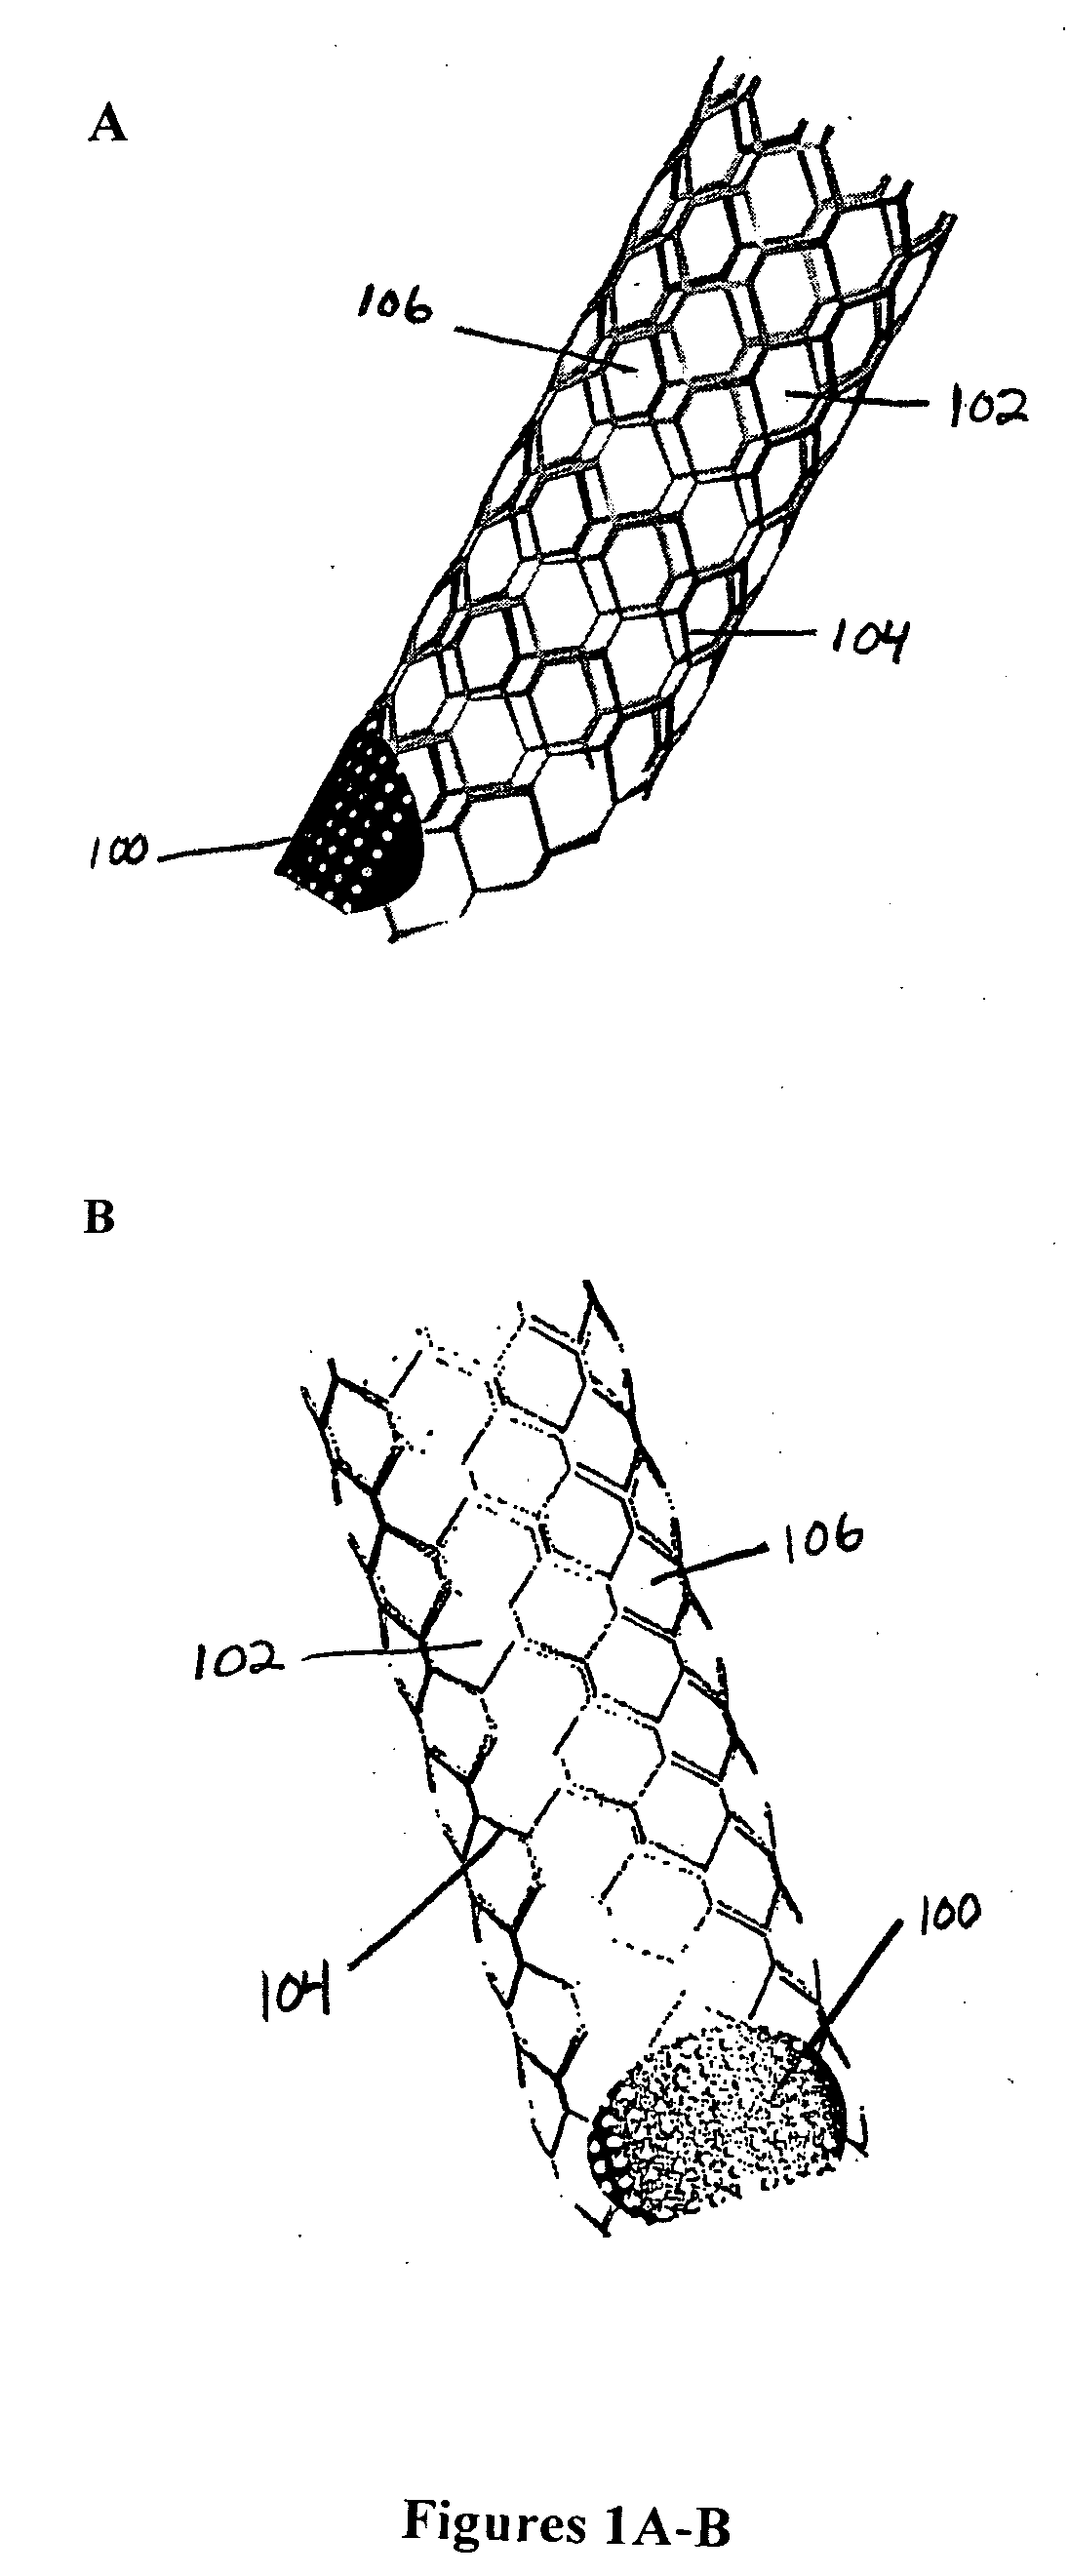 Stent vascular intervention device and methods for treating aneurysms